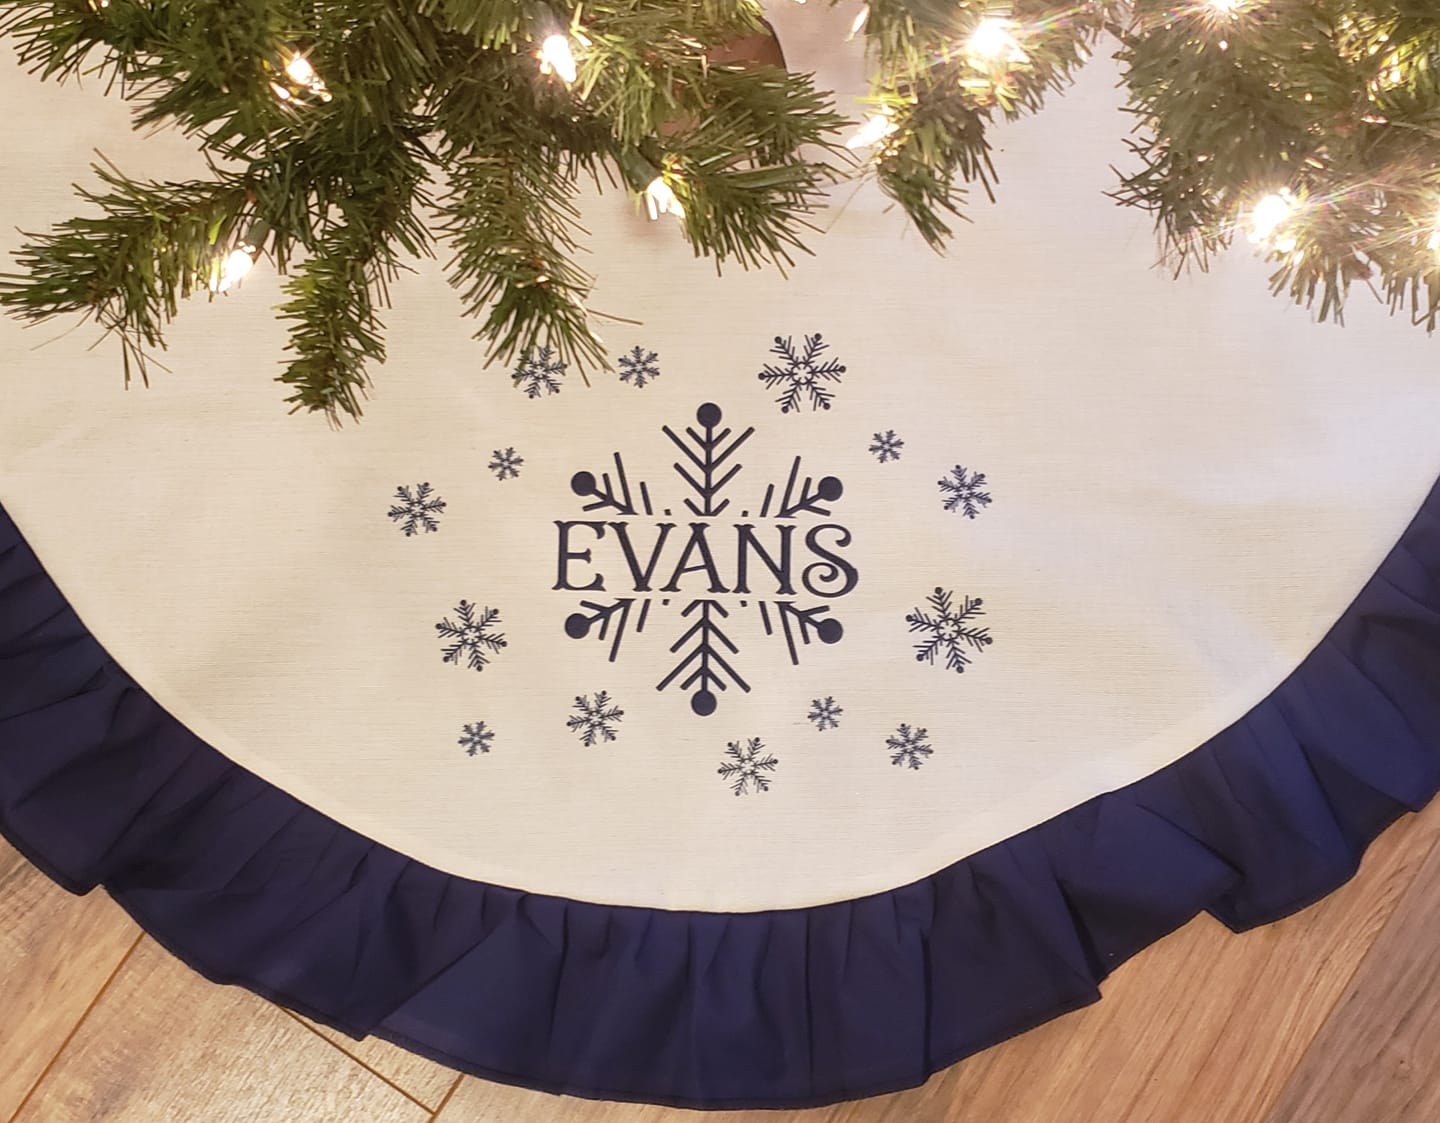 (Instant Print) Digital Download - Snowflake split design - made for our sublimation tree skirts